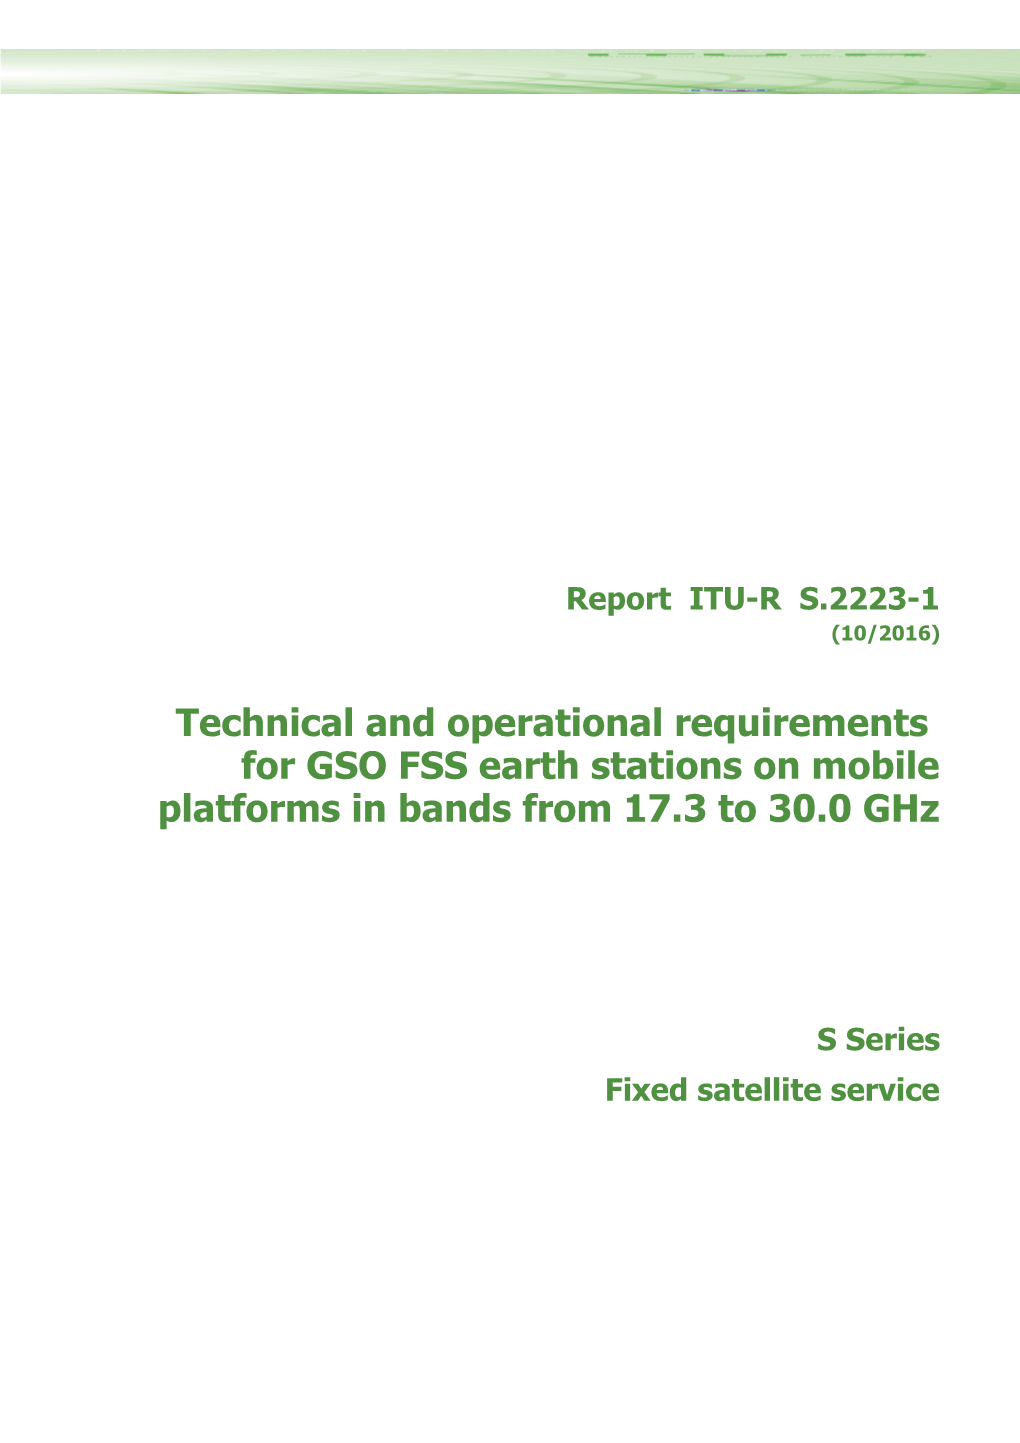 Technical and Operational Requirements for GSO FSS Earth Stations on Mobile Platforms In